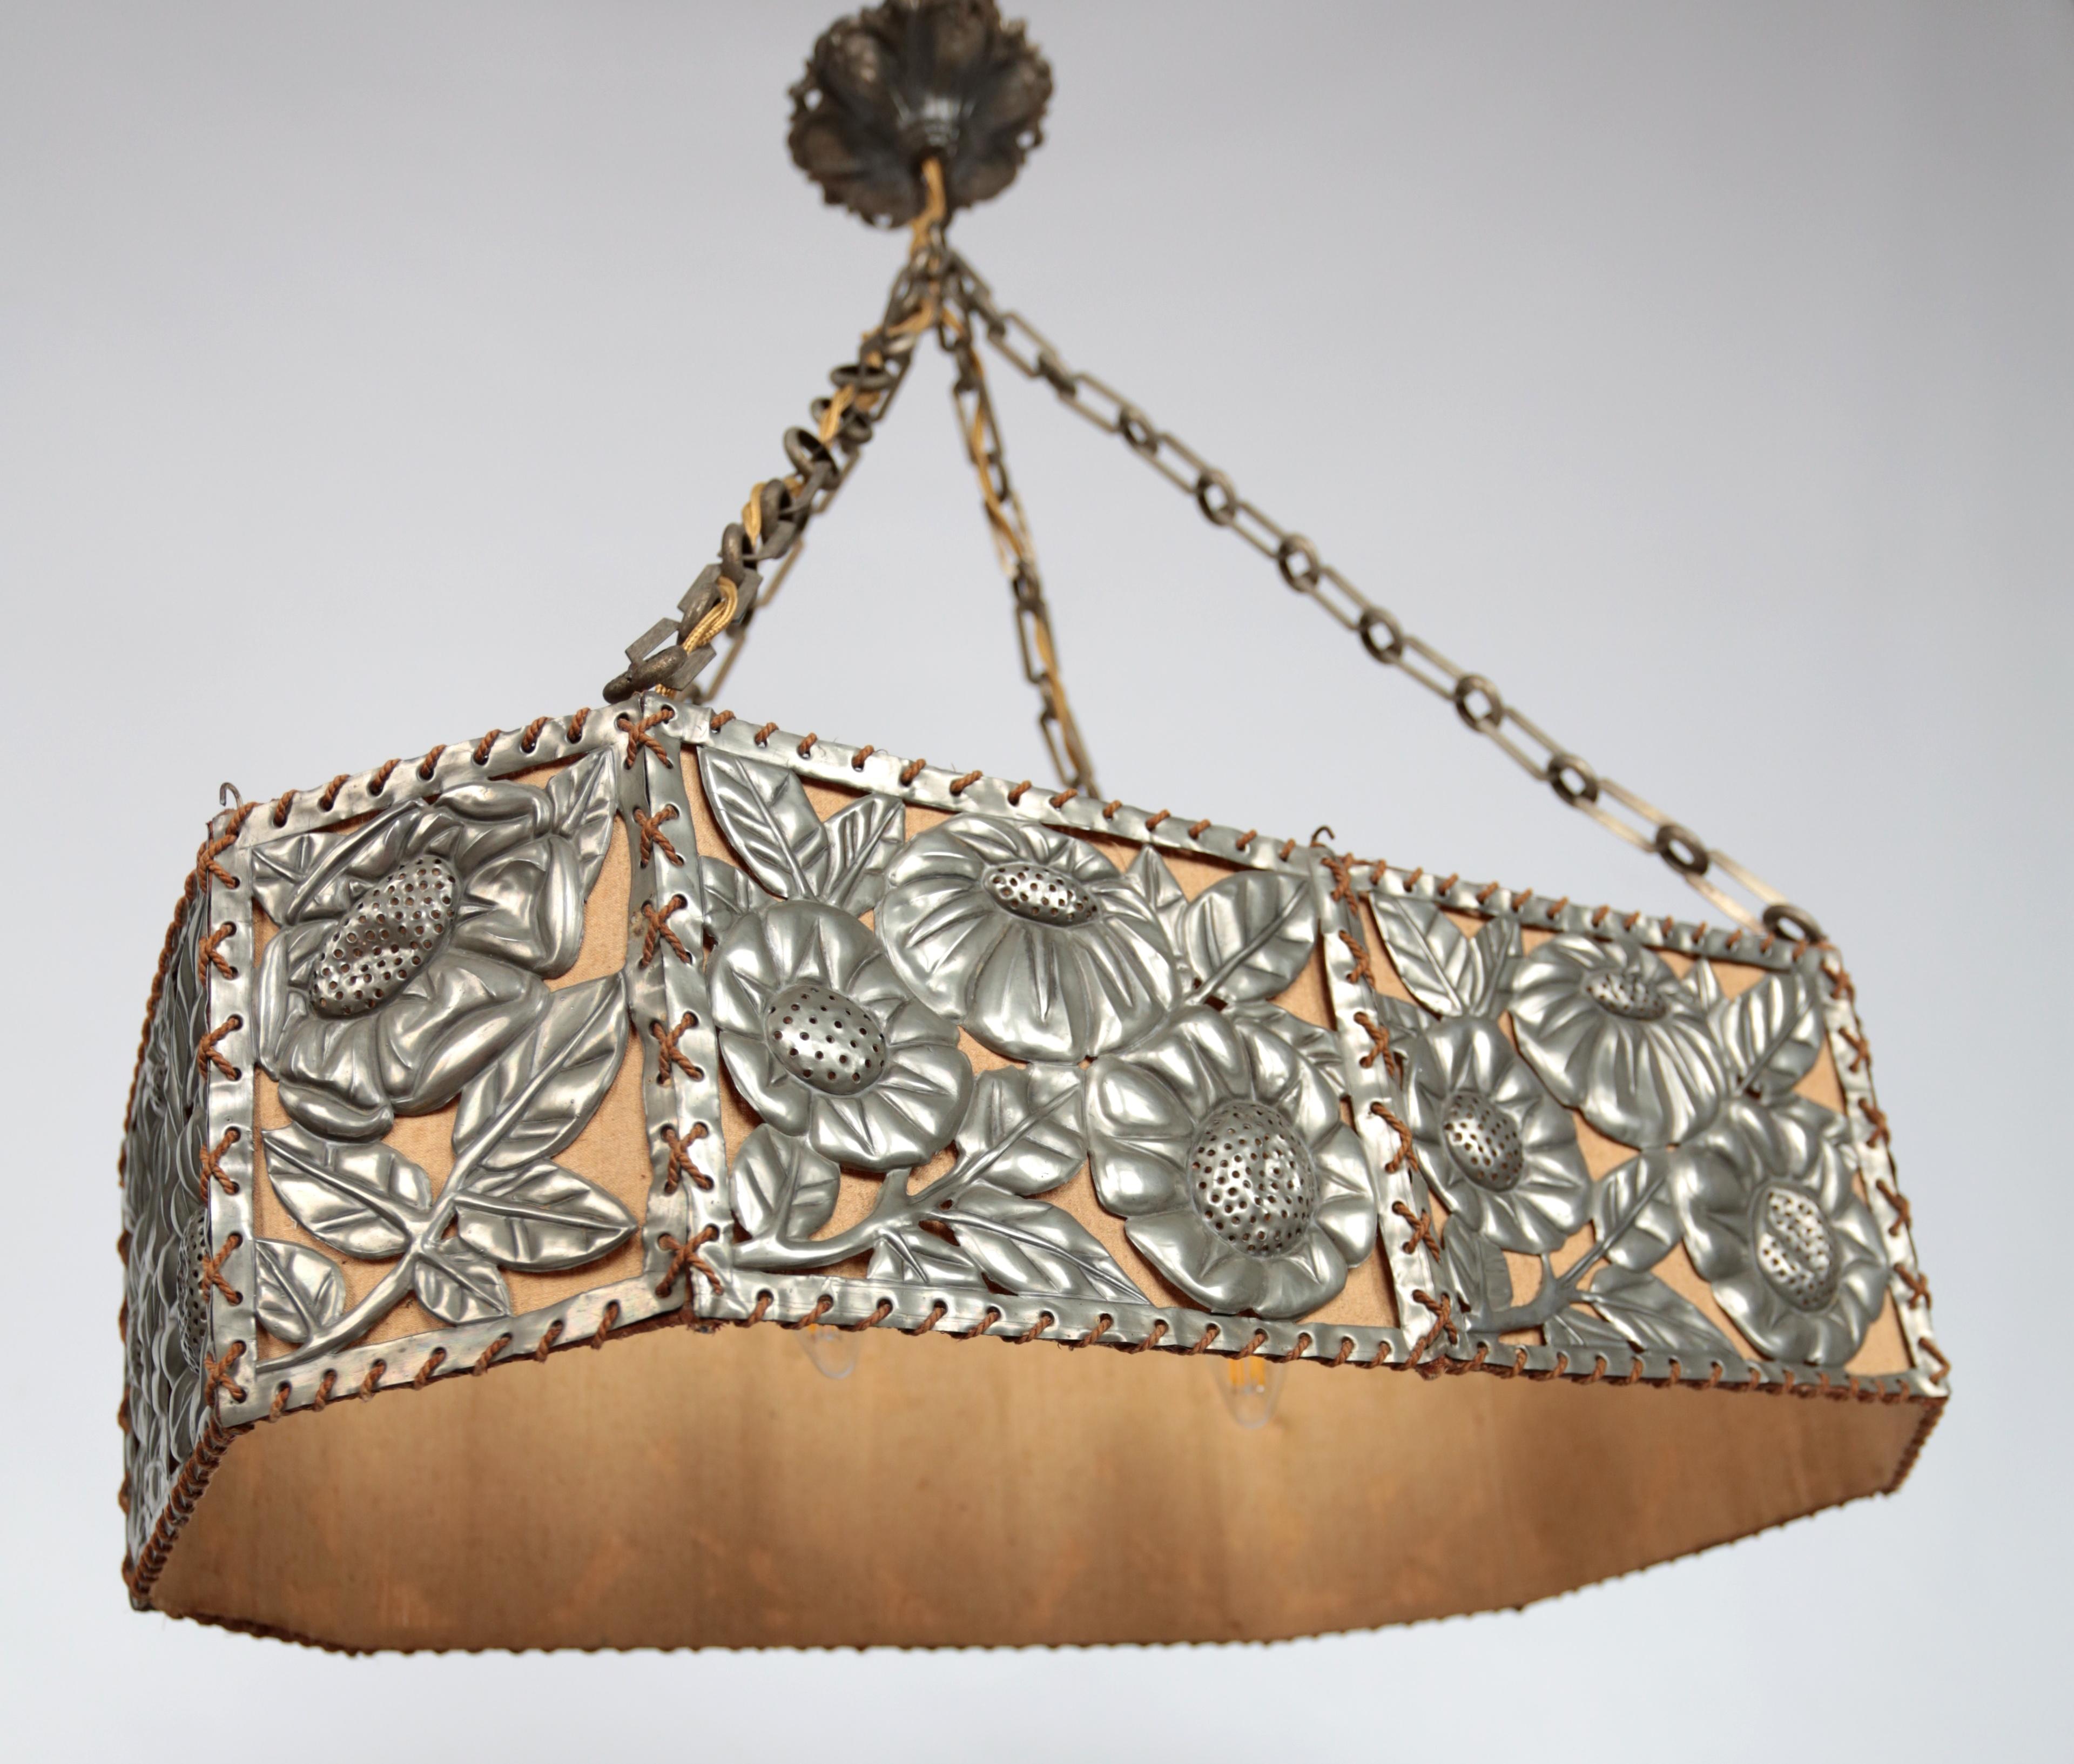 Art nouveau chandelier original

An interesting model of the Art Nouveau chandelier with rich pewter decoration. The chandelier was handmade in the late 19th century. The wiring is new in copper. New old-style power cable with fabric braid. The